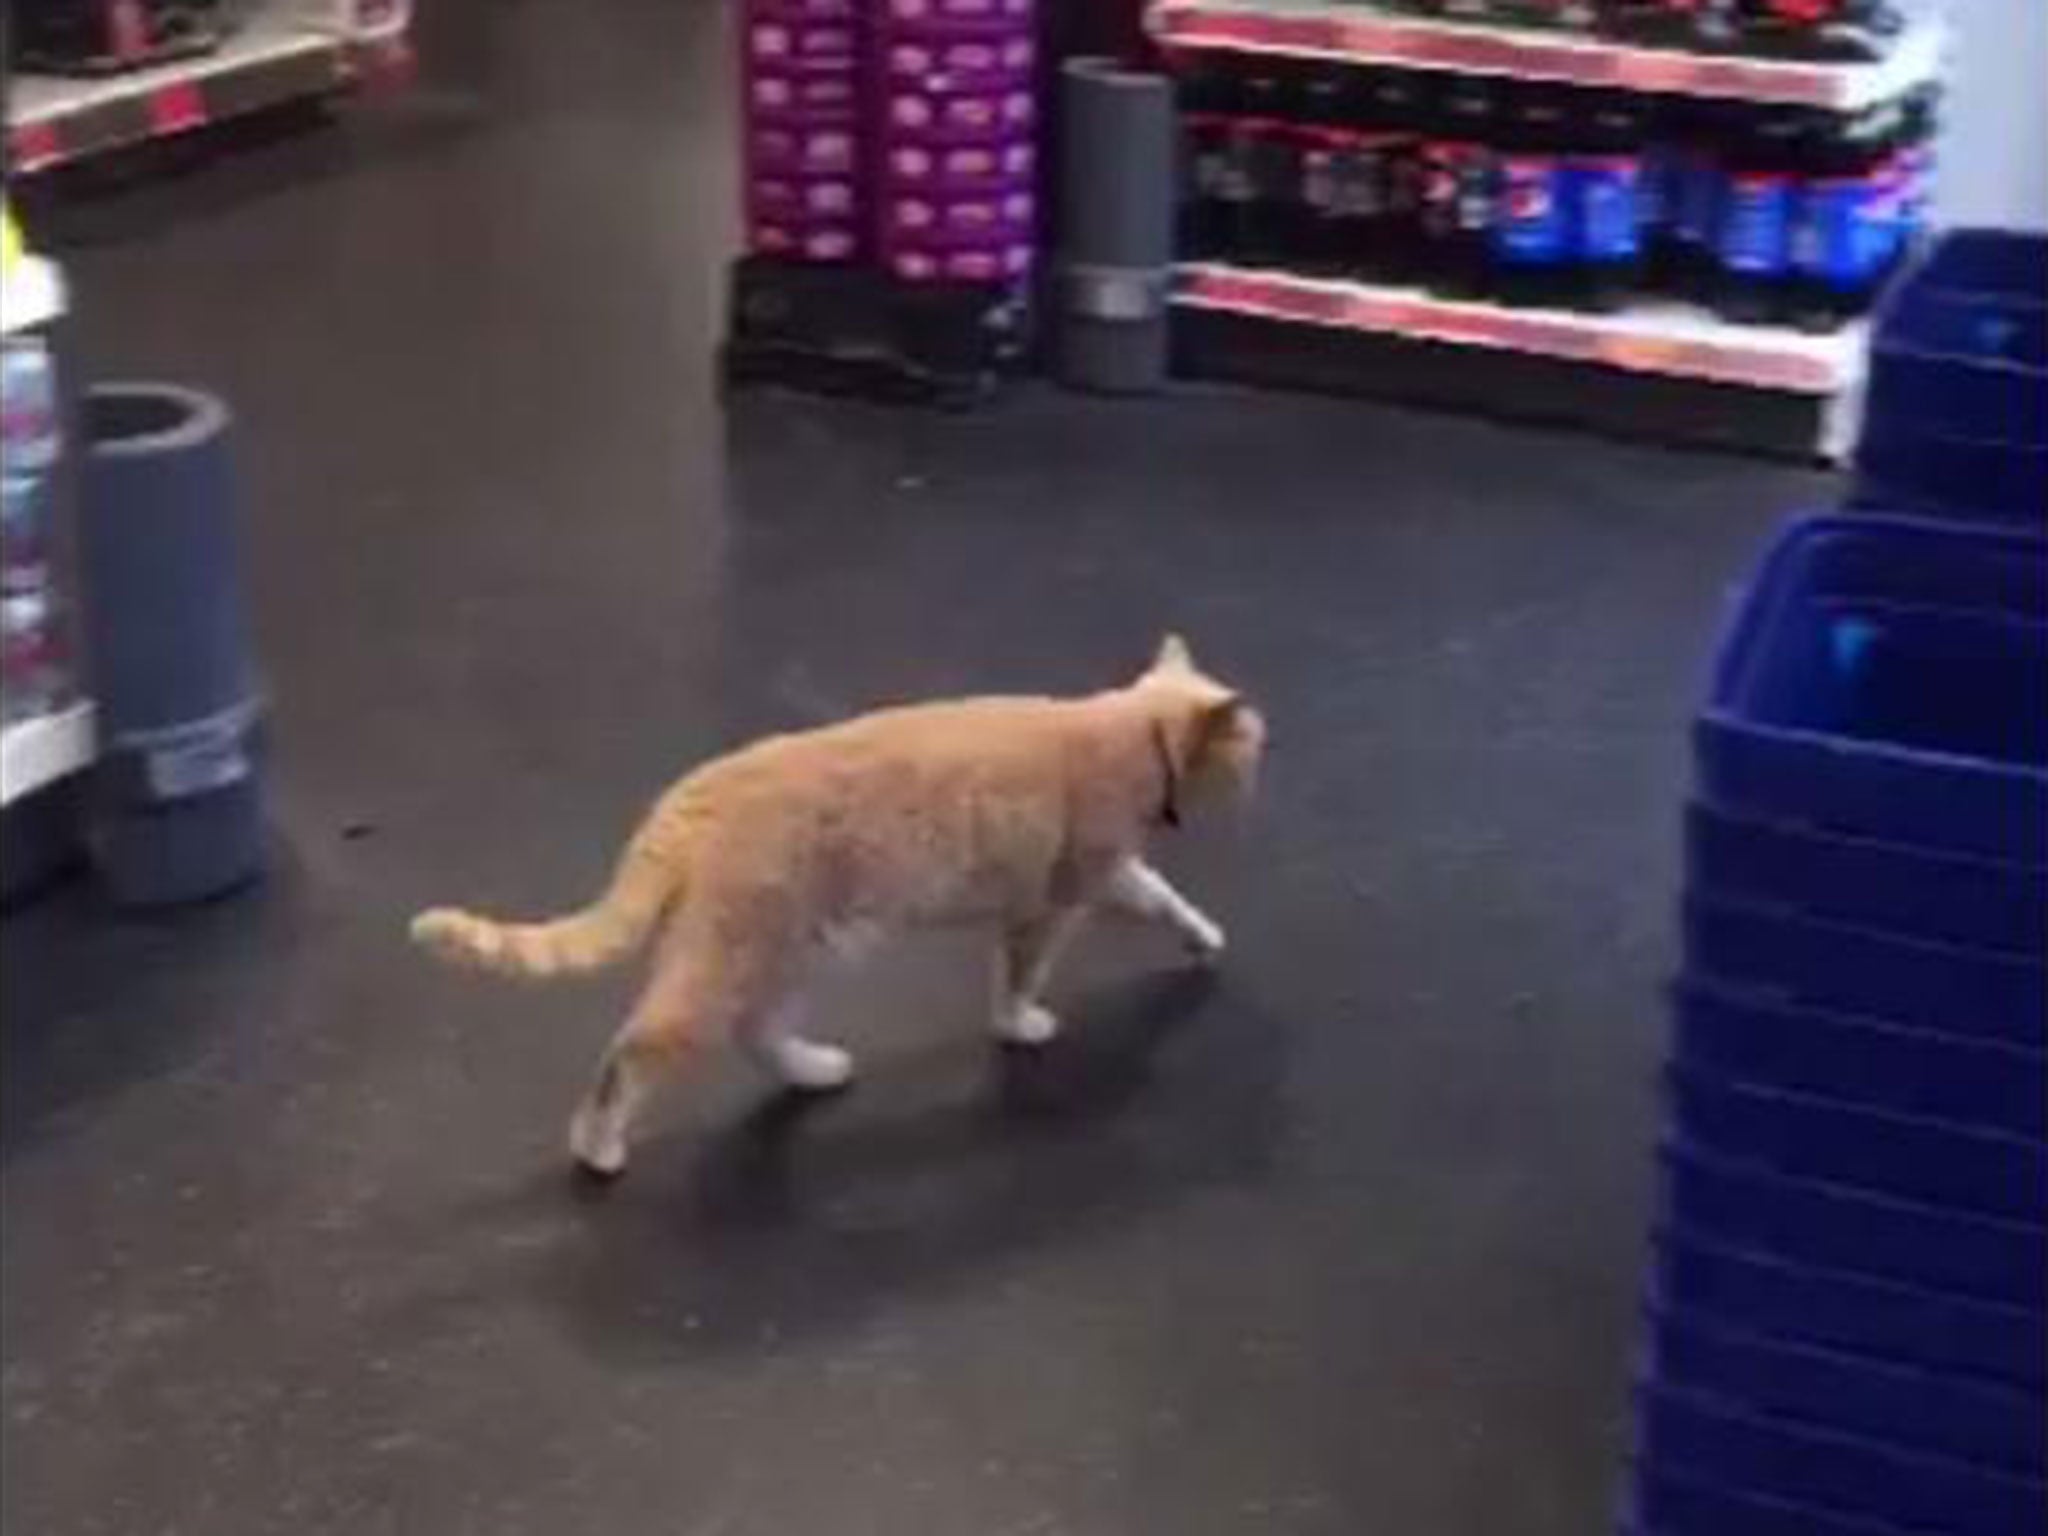 The cat is a regular at Sainsbury's in Brockley